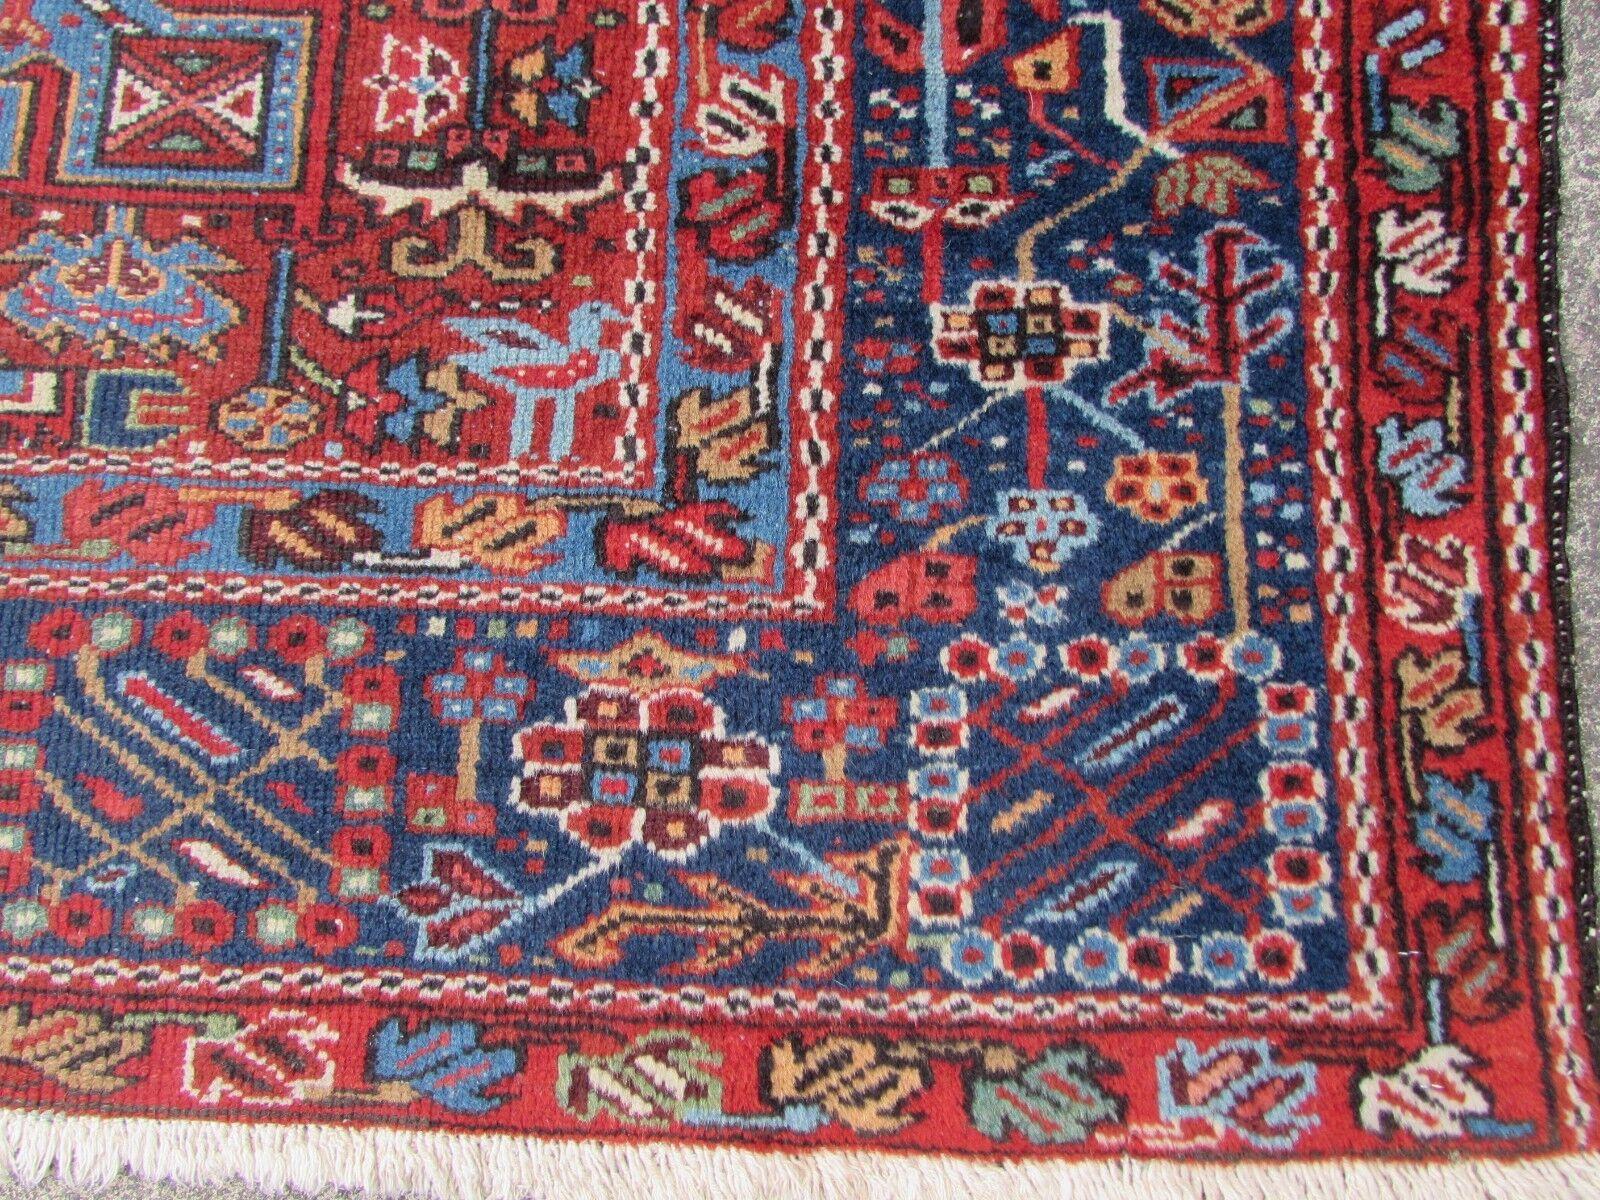  Handmade Antique Persian Style Karajeh Rug 4.6' x 6', 1920s - 1Q56 For Sale 5